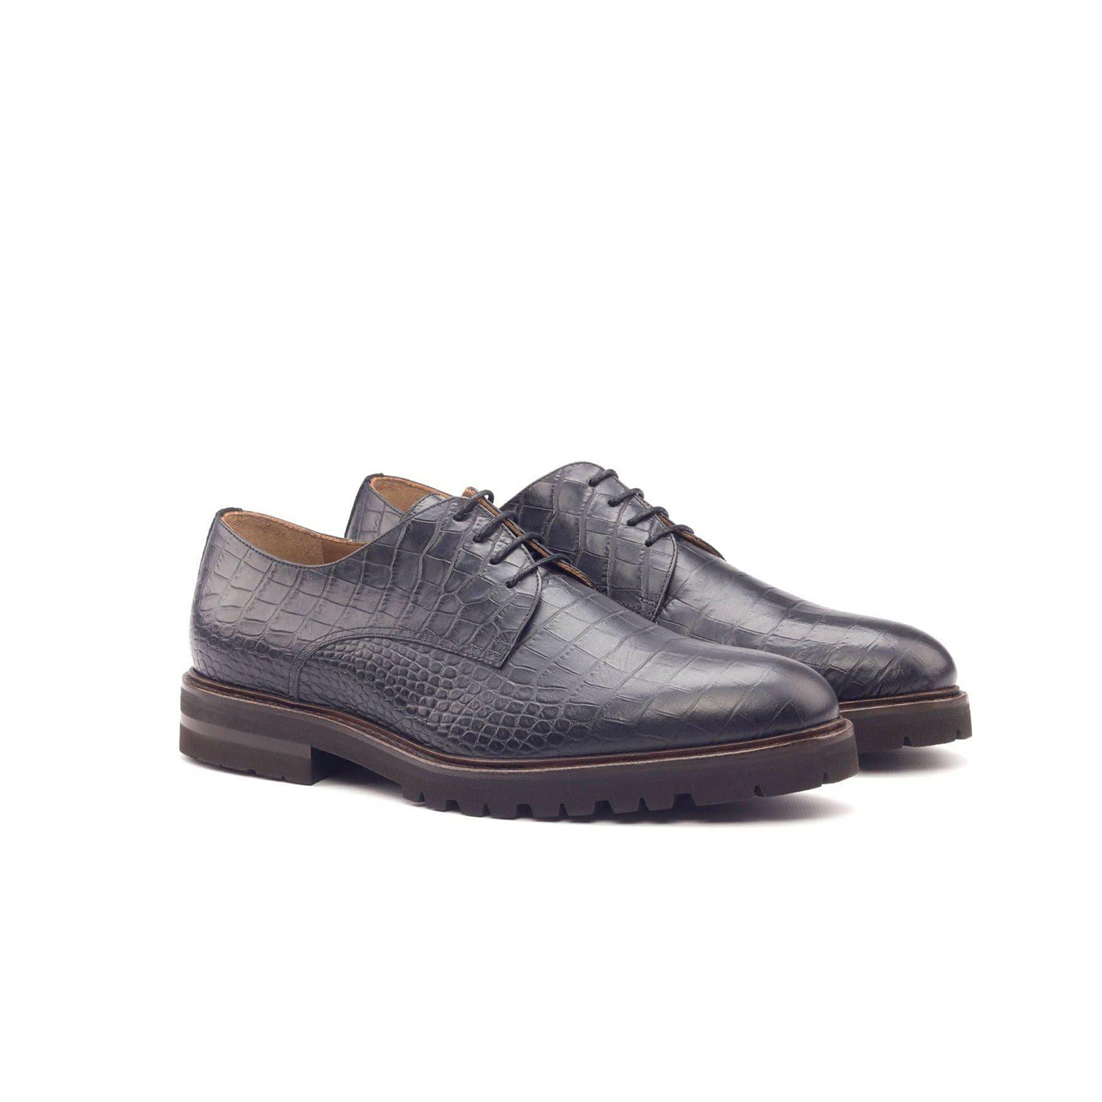 Celestial Serenity Derby Shoes